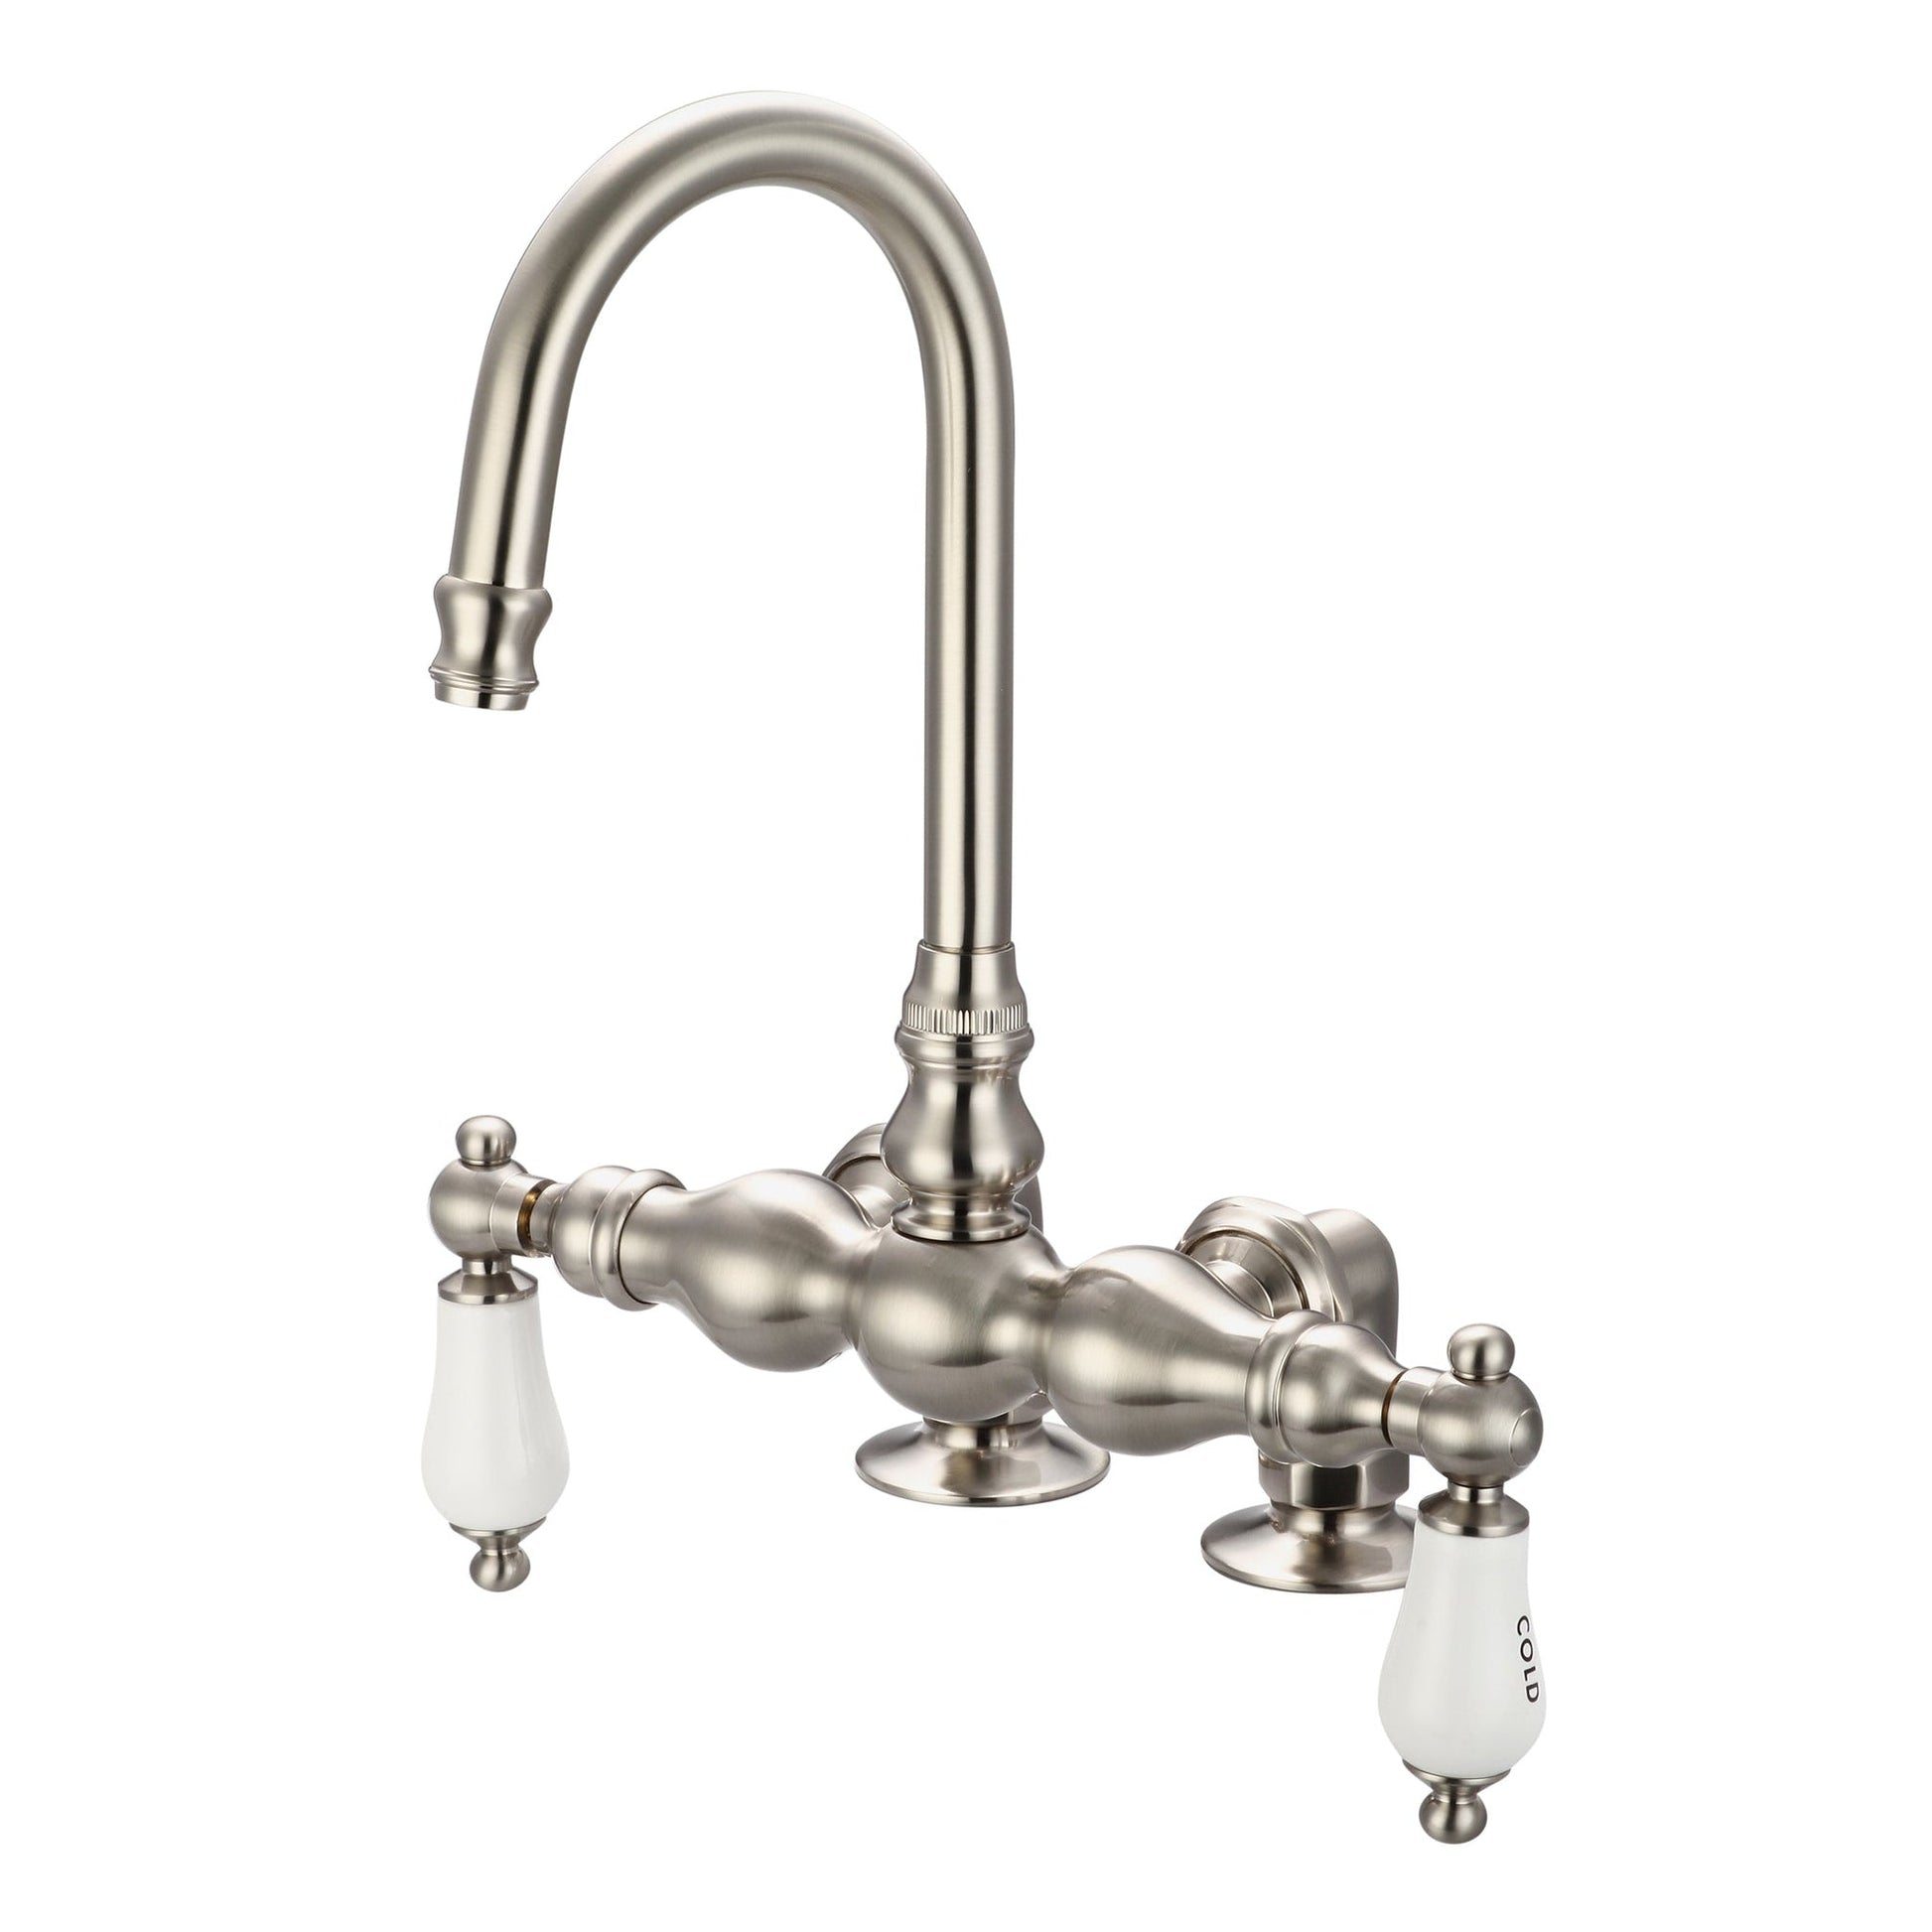 Water Creation Vintage Classic Center Deck Mount Tub F6-0016 9.25" Grey Solid Brass Faucet With Gooseneck Spout And 2-Inch Risers And Porcelain Lever Handles, Hot And Cold Labels Included